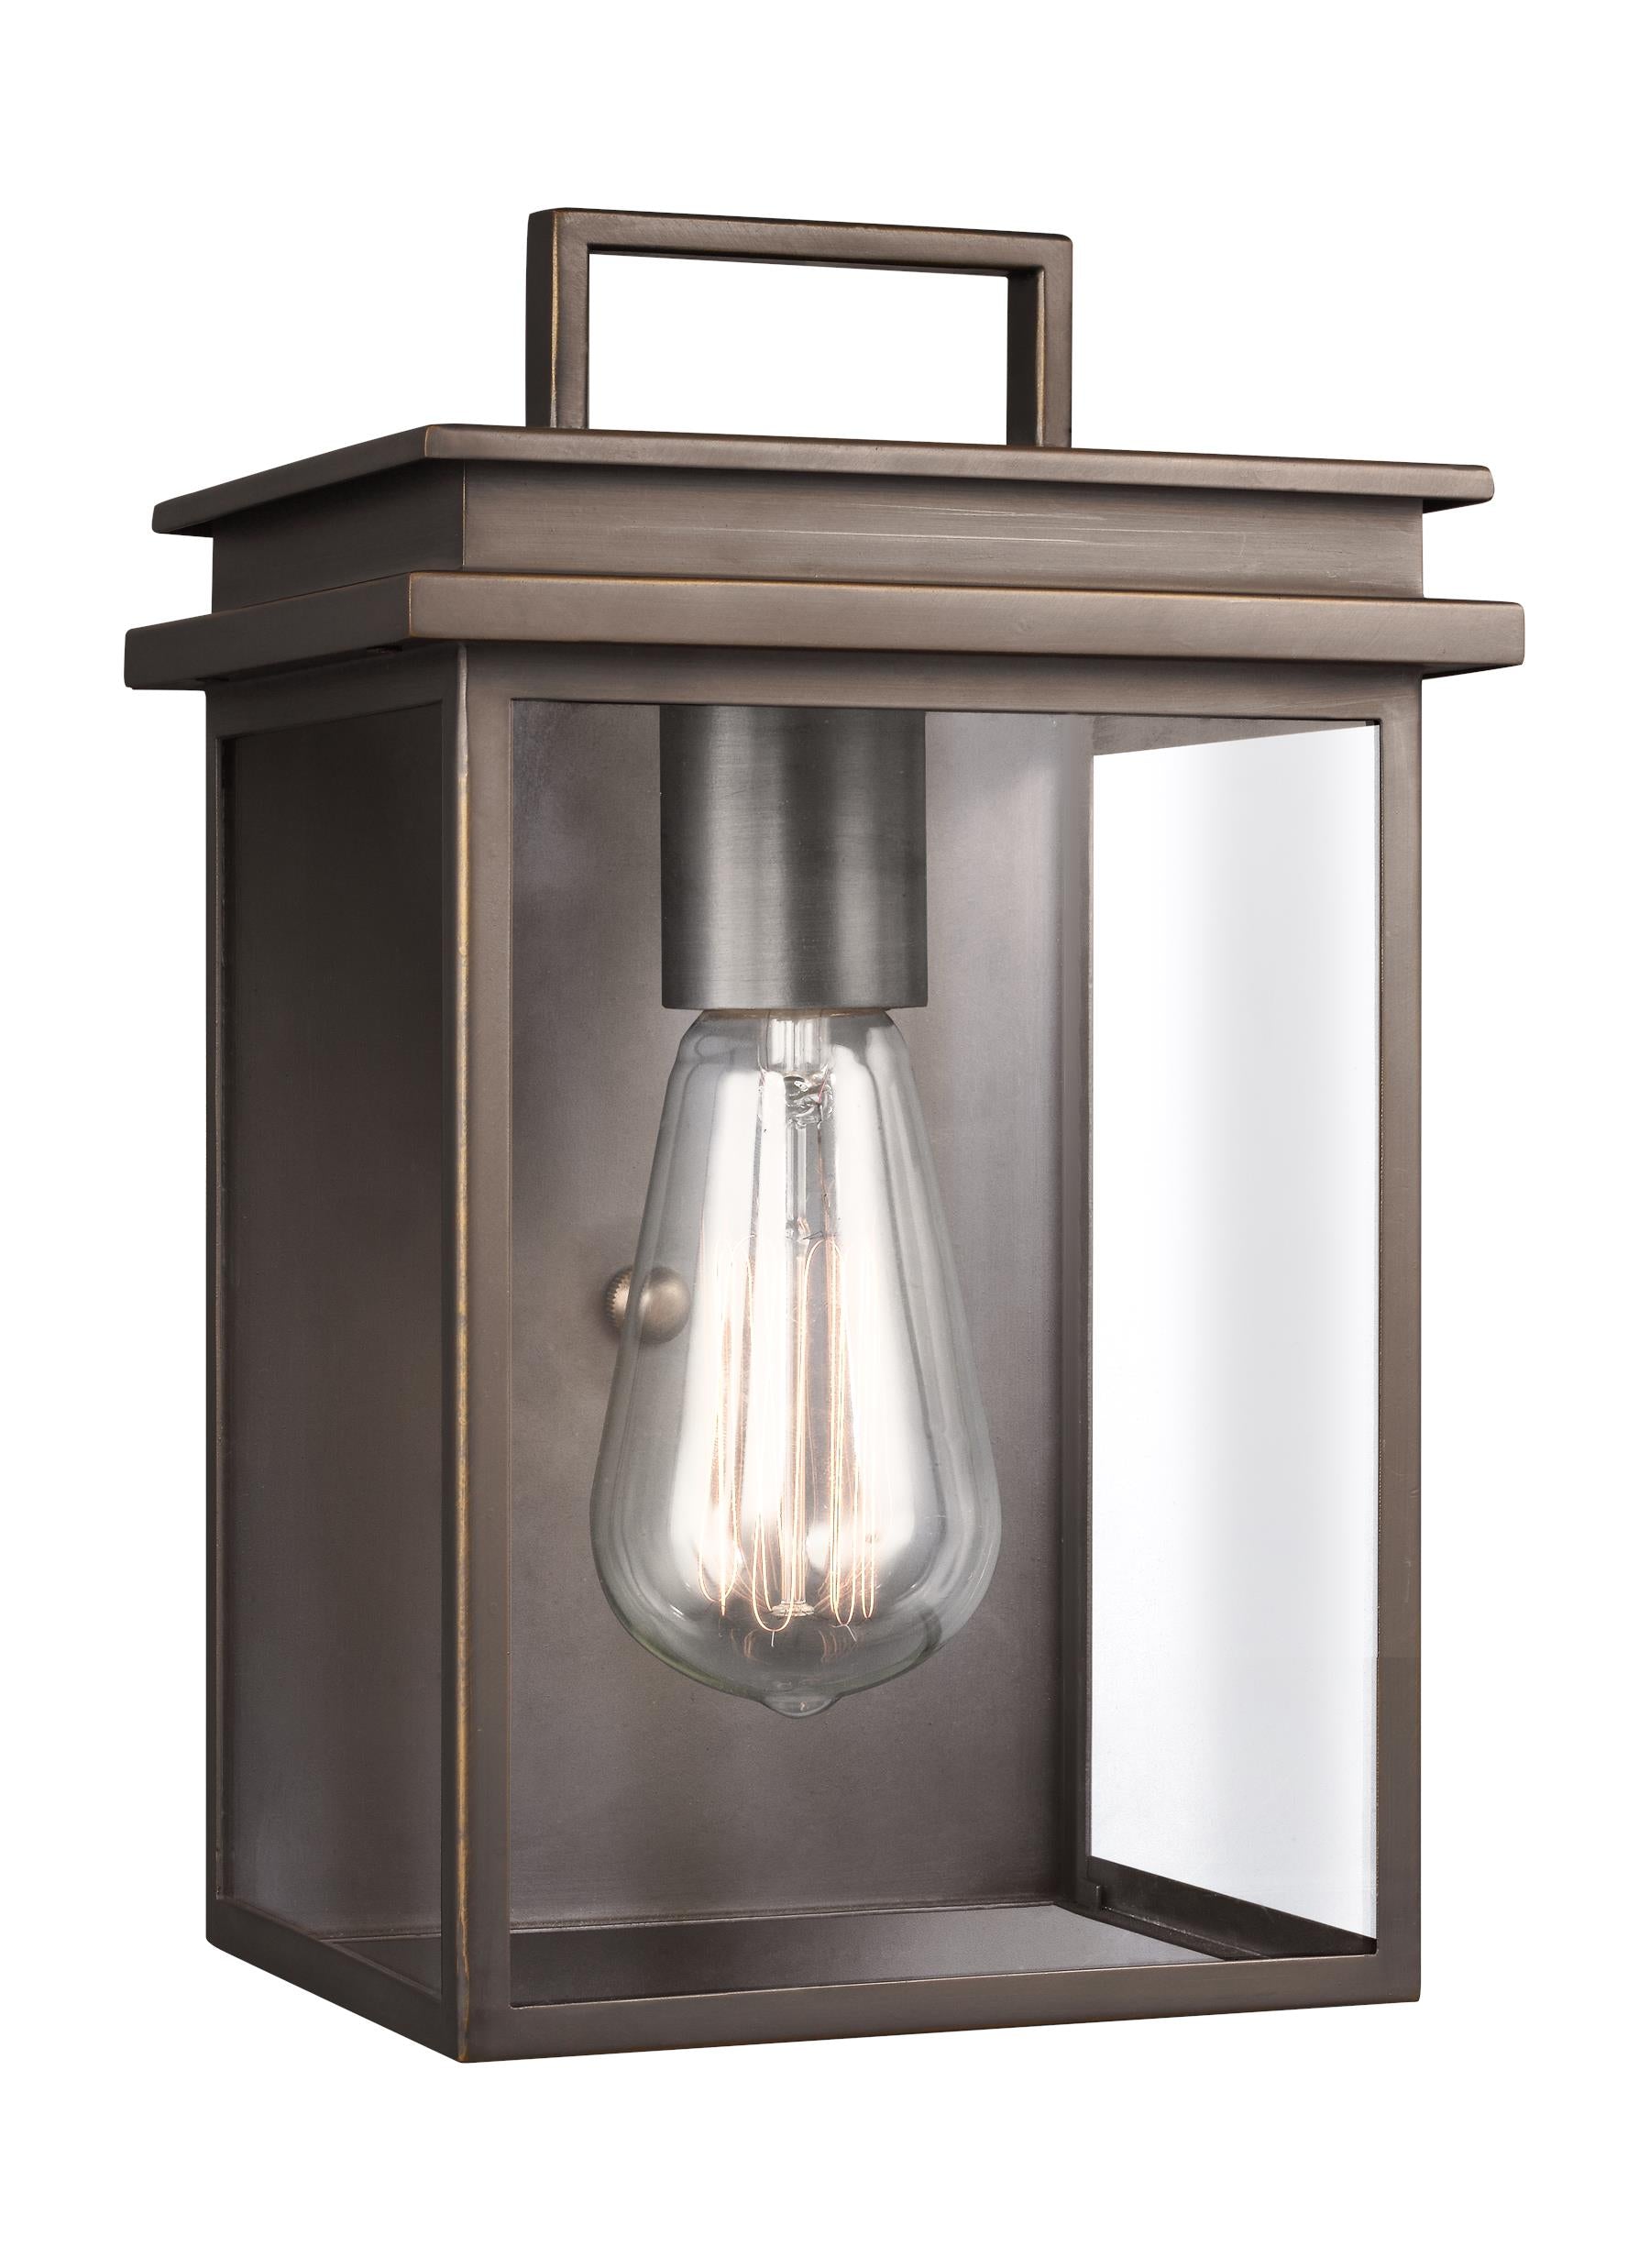 Feiss Glenview Extra Small Lantern